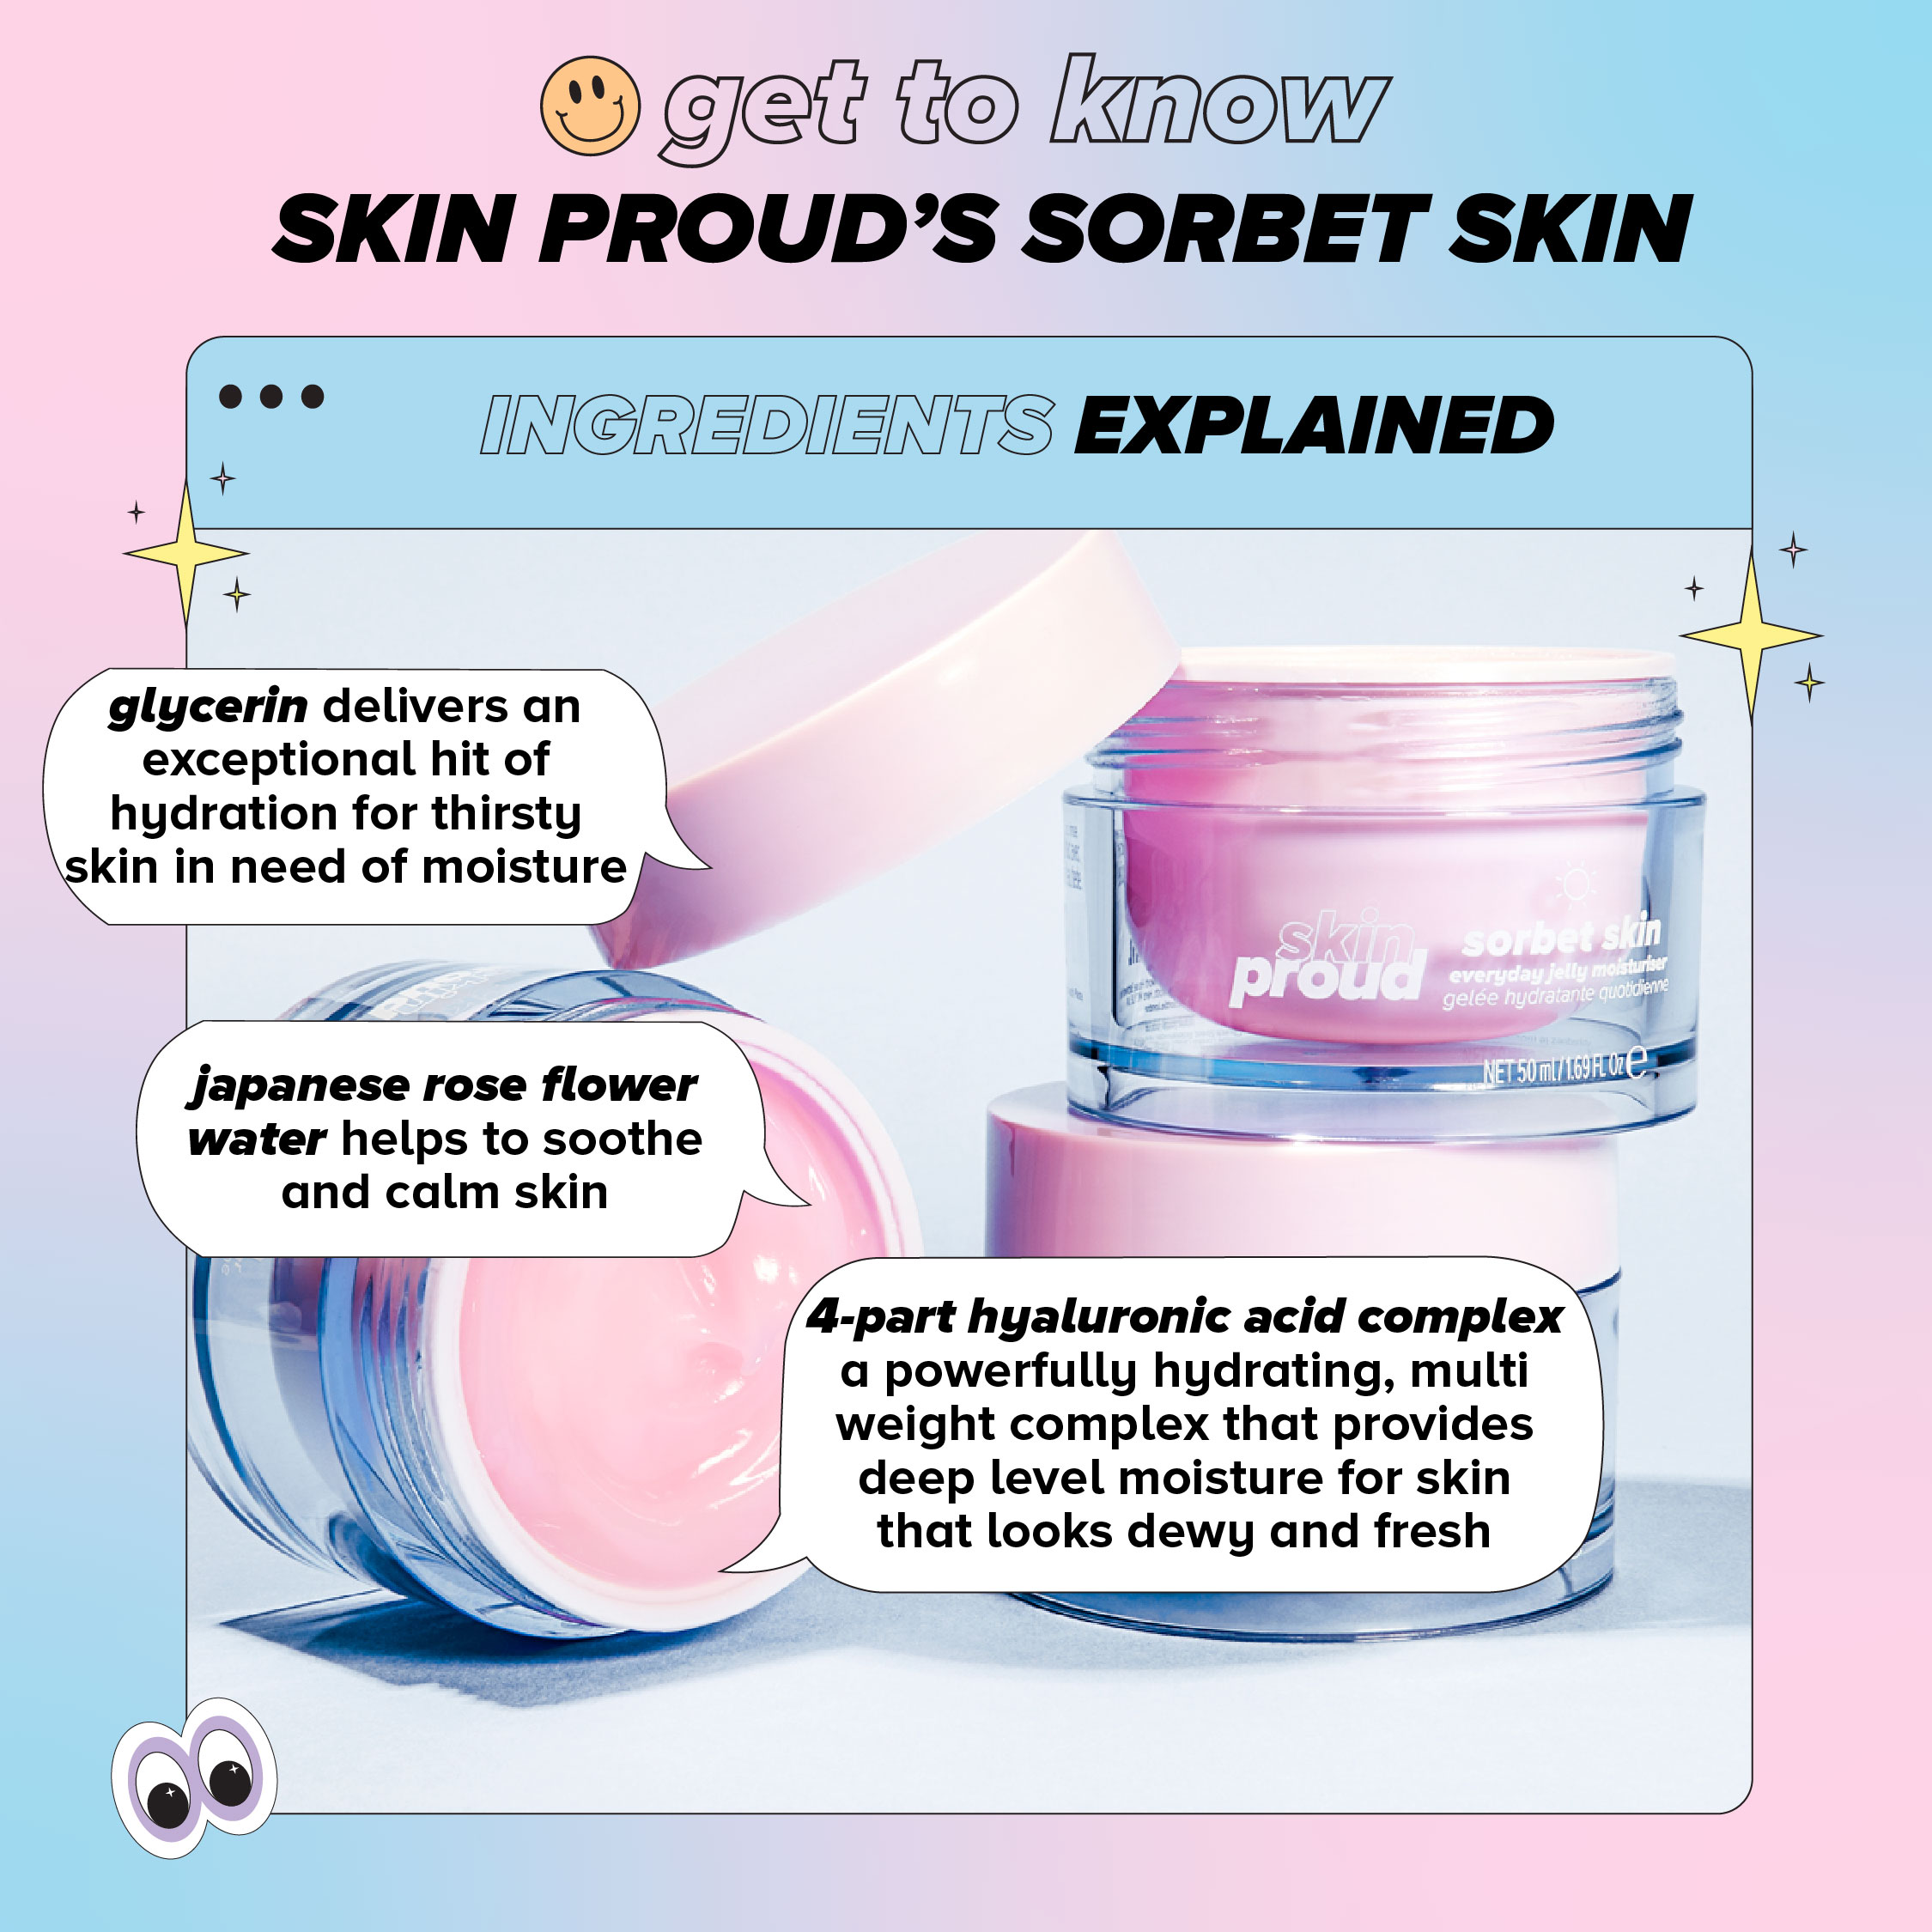 Skin Proud Sorbet Skin, Everyday Jelly Face Moisturizer with Hyaluronic Acid Complex, Oil-Free, 100% Vegan, 1.69 fl oz - image 3 of 12